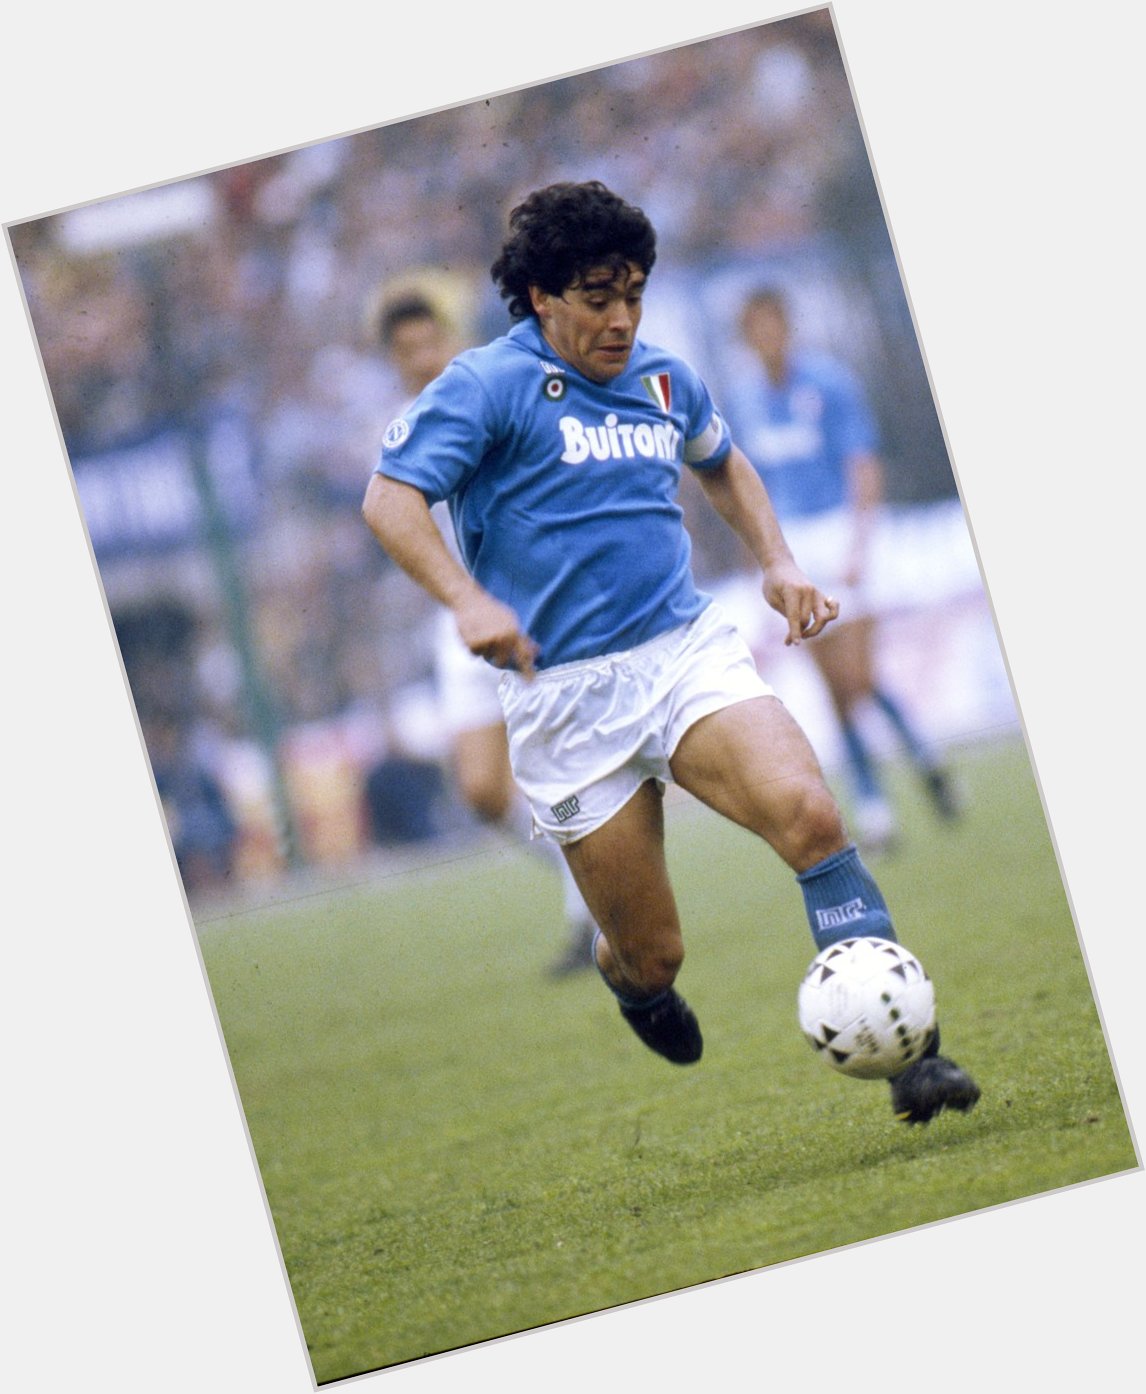 One of the all-time greats was born in 1960...

Wish Diego Maradona a happy birthday!    